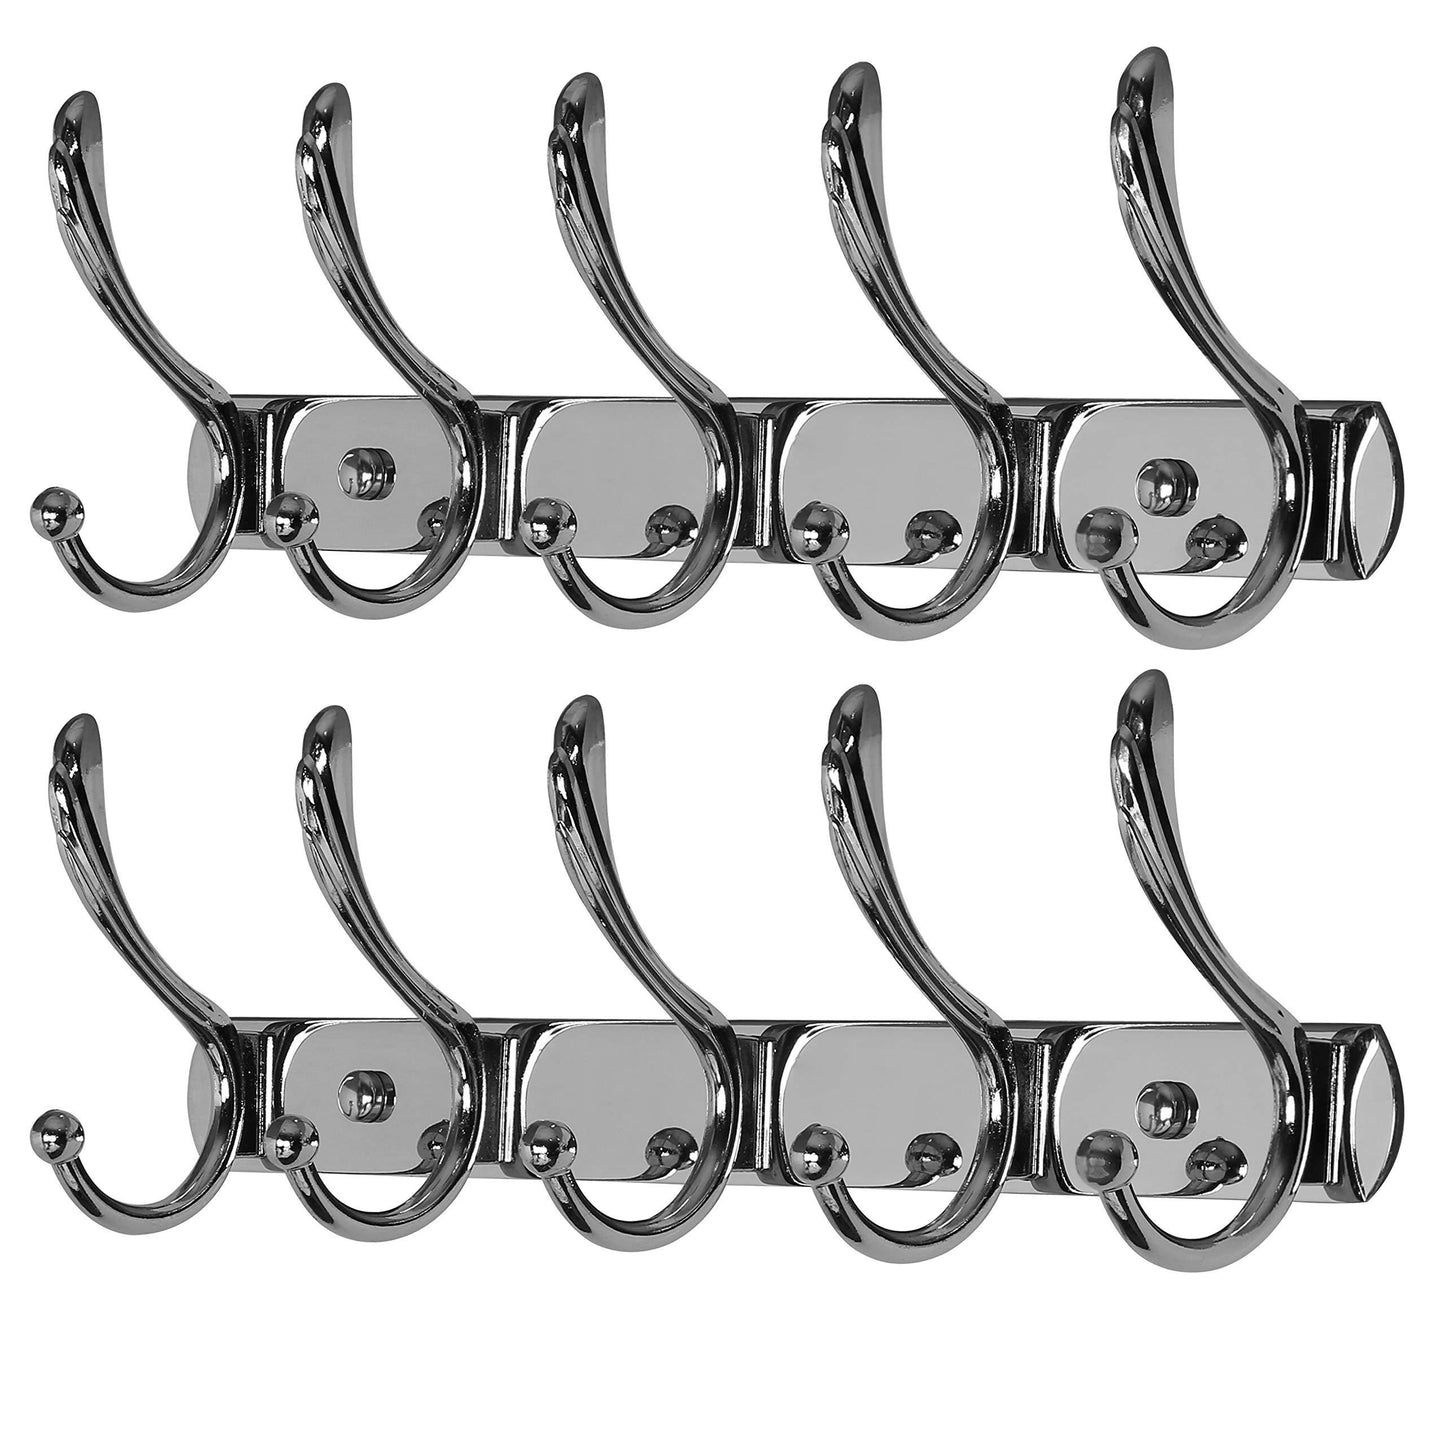 Dseap Coat Rack Wall Mounted, with 5 Jumbo Double Hooks, Heavy Duty, Stainless Steel, Metal Coat Hook, Hanging Clothes Towel Hat Robes, for Mudroom Bathroom Entryway, Chromed,2 Packs